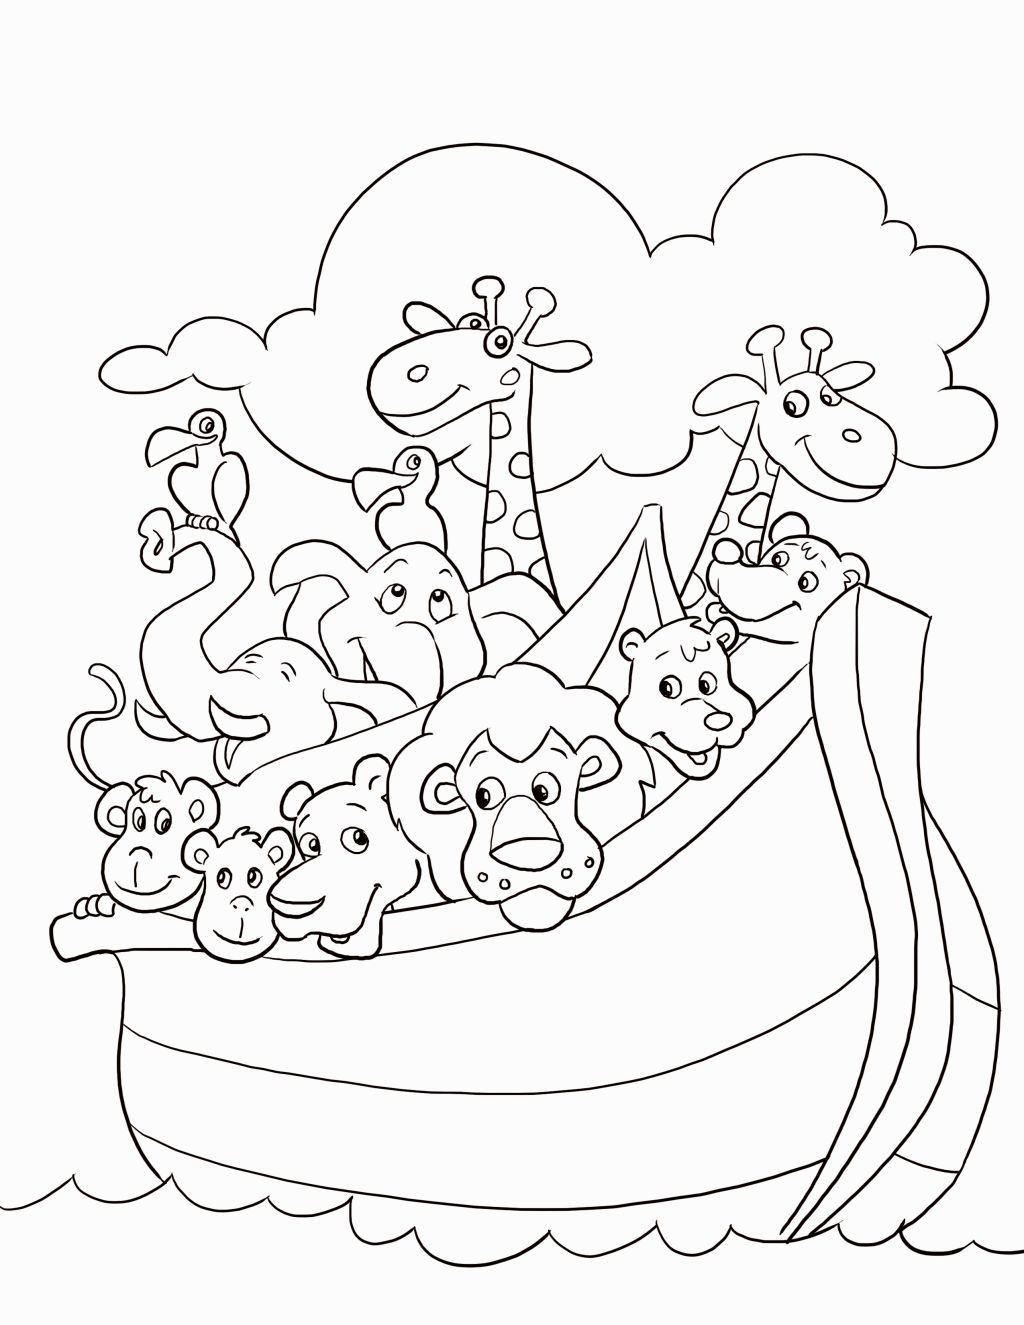 Coloring Pages For Kids Christian
 Christian Coloring Pages For Preschoolers